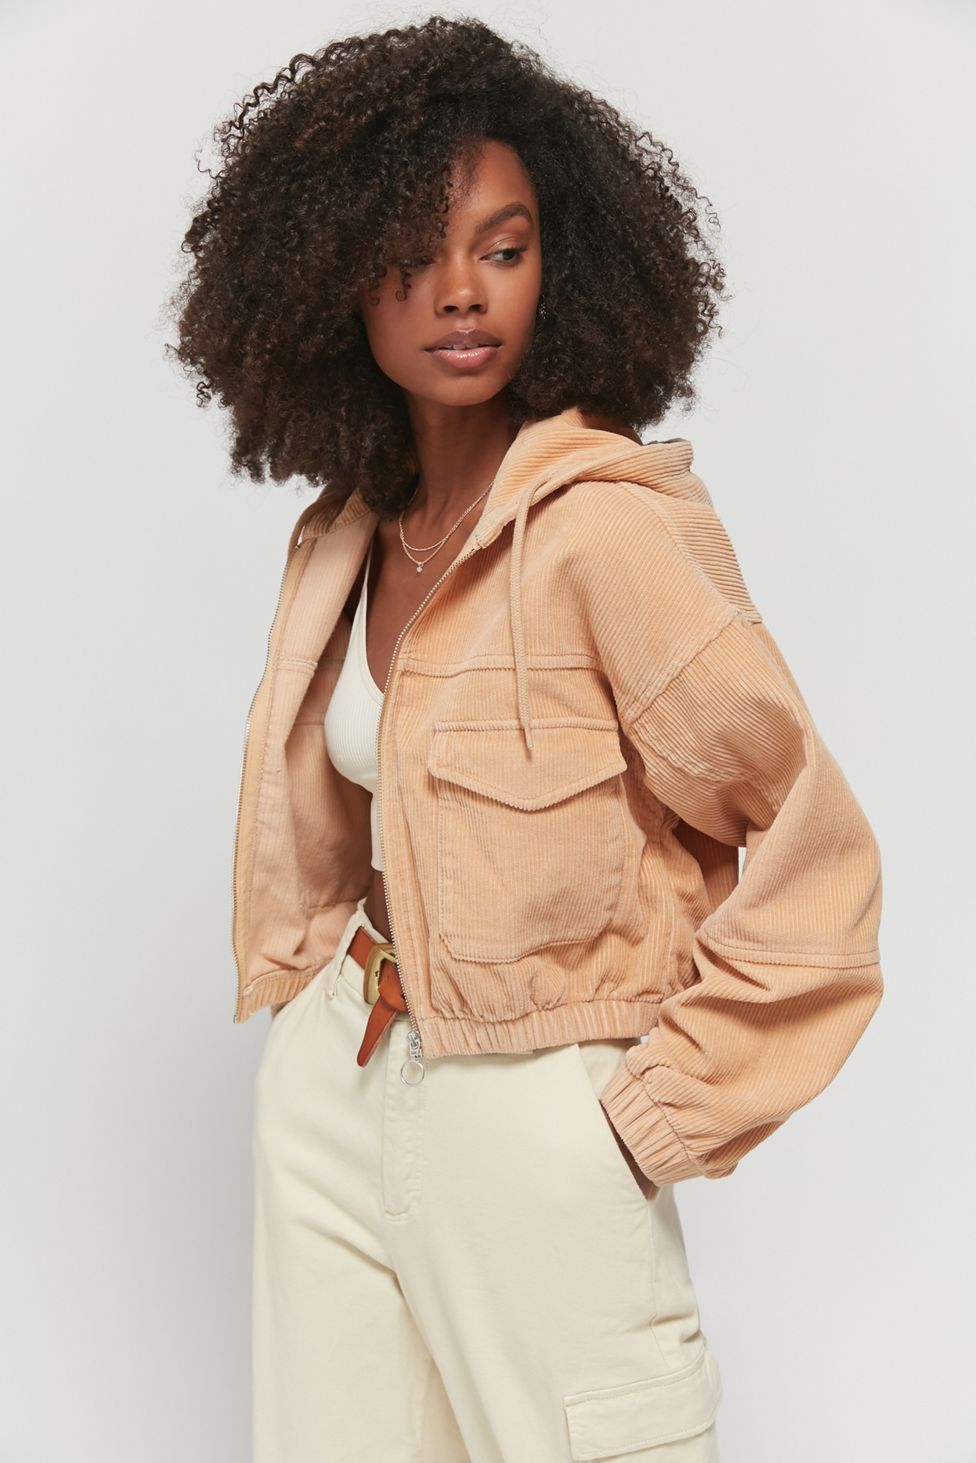 Urban Outfitters Labor Day 2020 Sale corduroy jacker